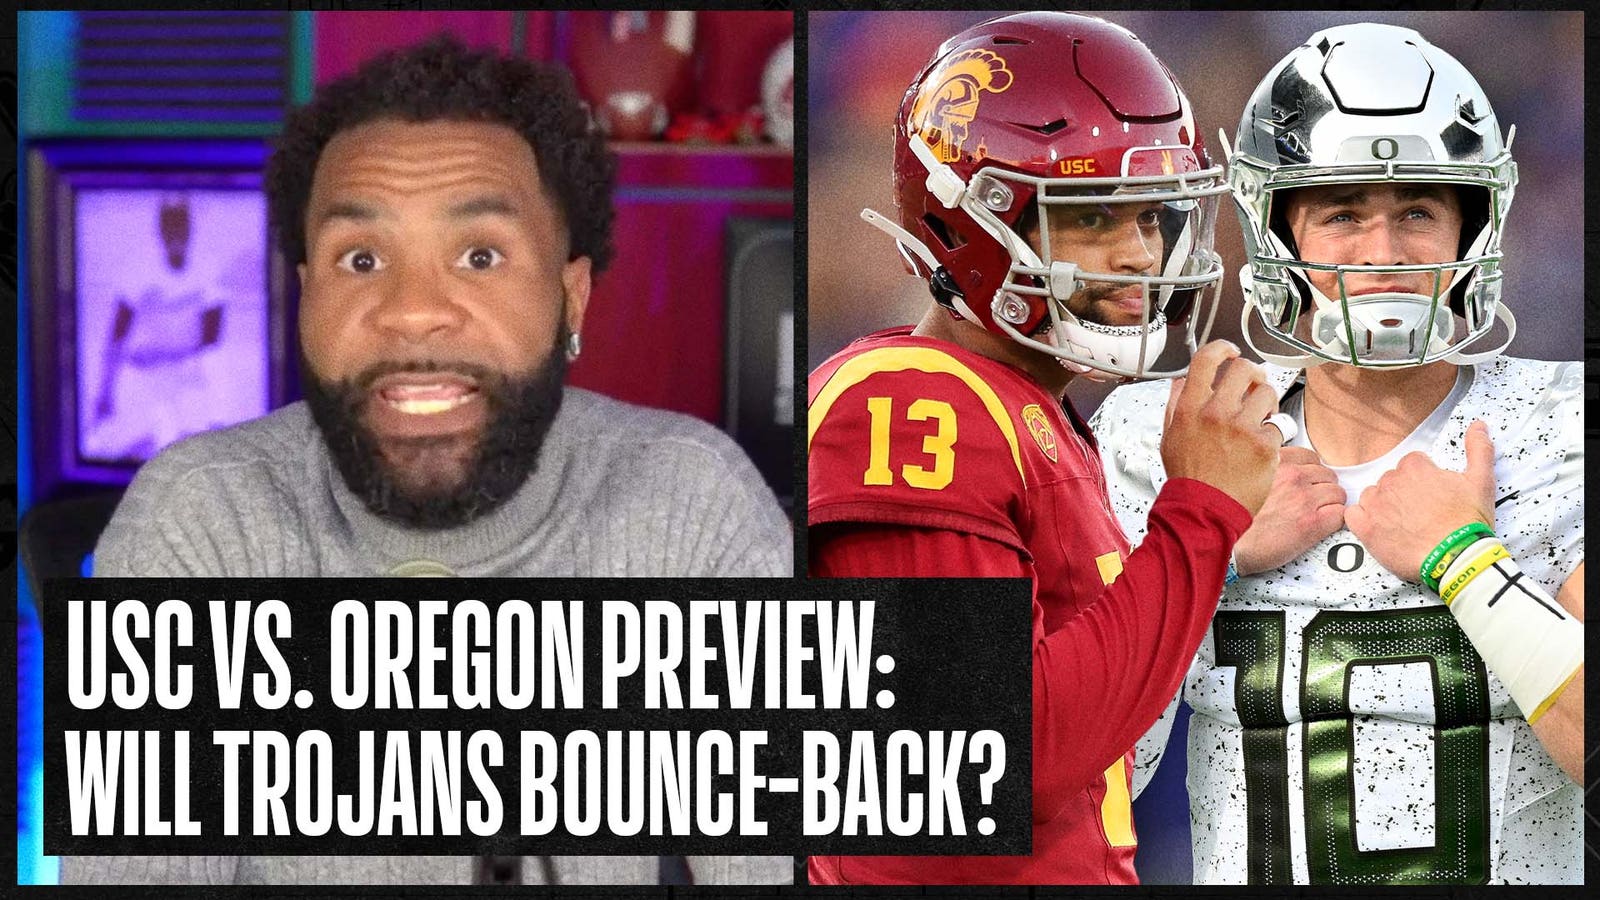 USC vs. Oregon preview: Can the Trojans bounce back?